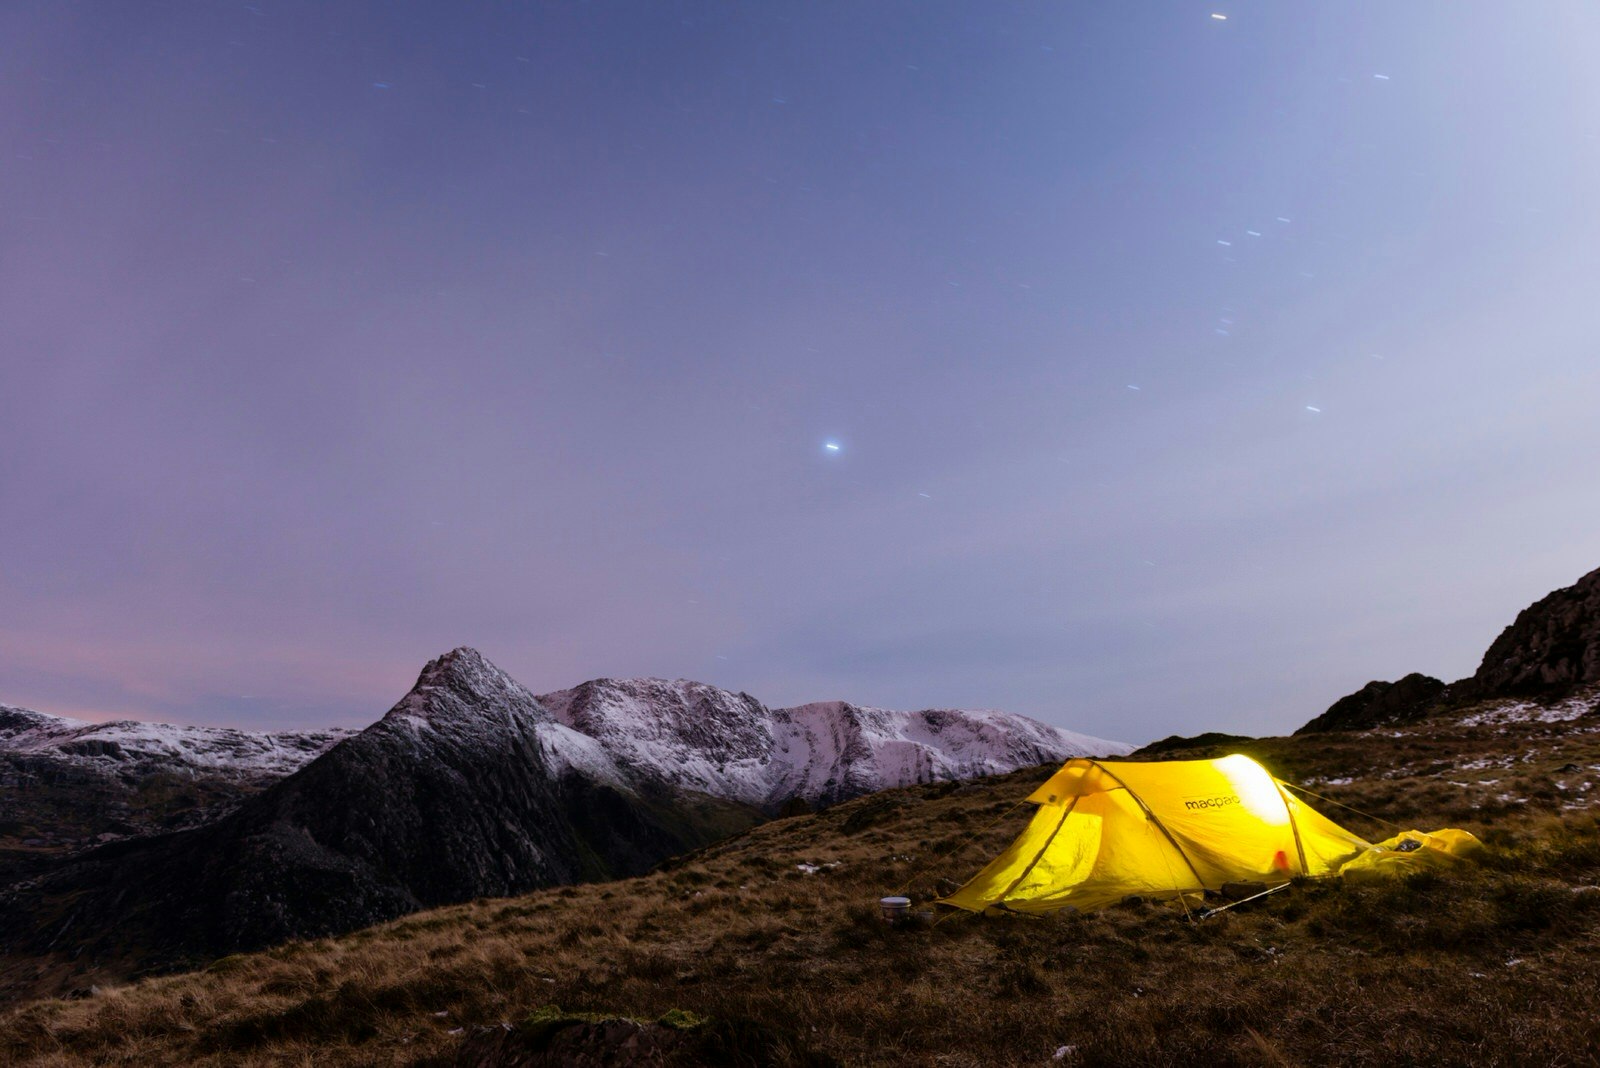 Night brings its own perspective: wild camping in the Ogwen Valley, in Snowdonia National Park, North Wales © Justin Foulkes / Lonely Planet